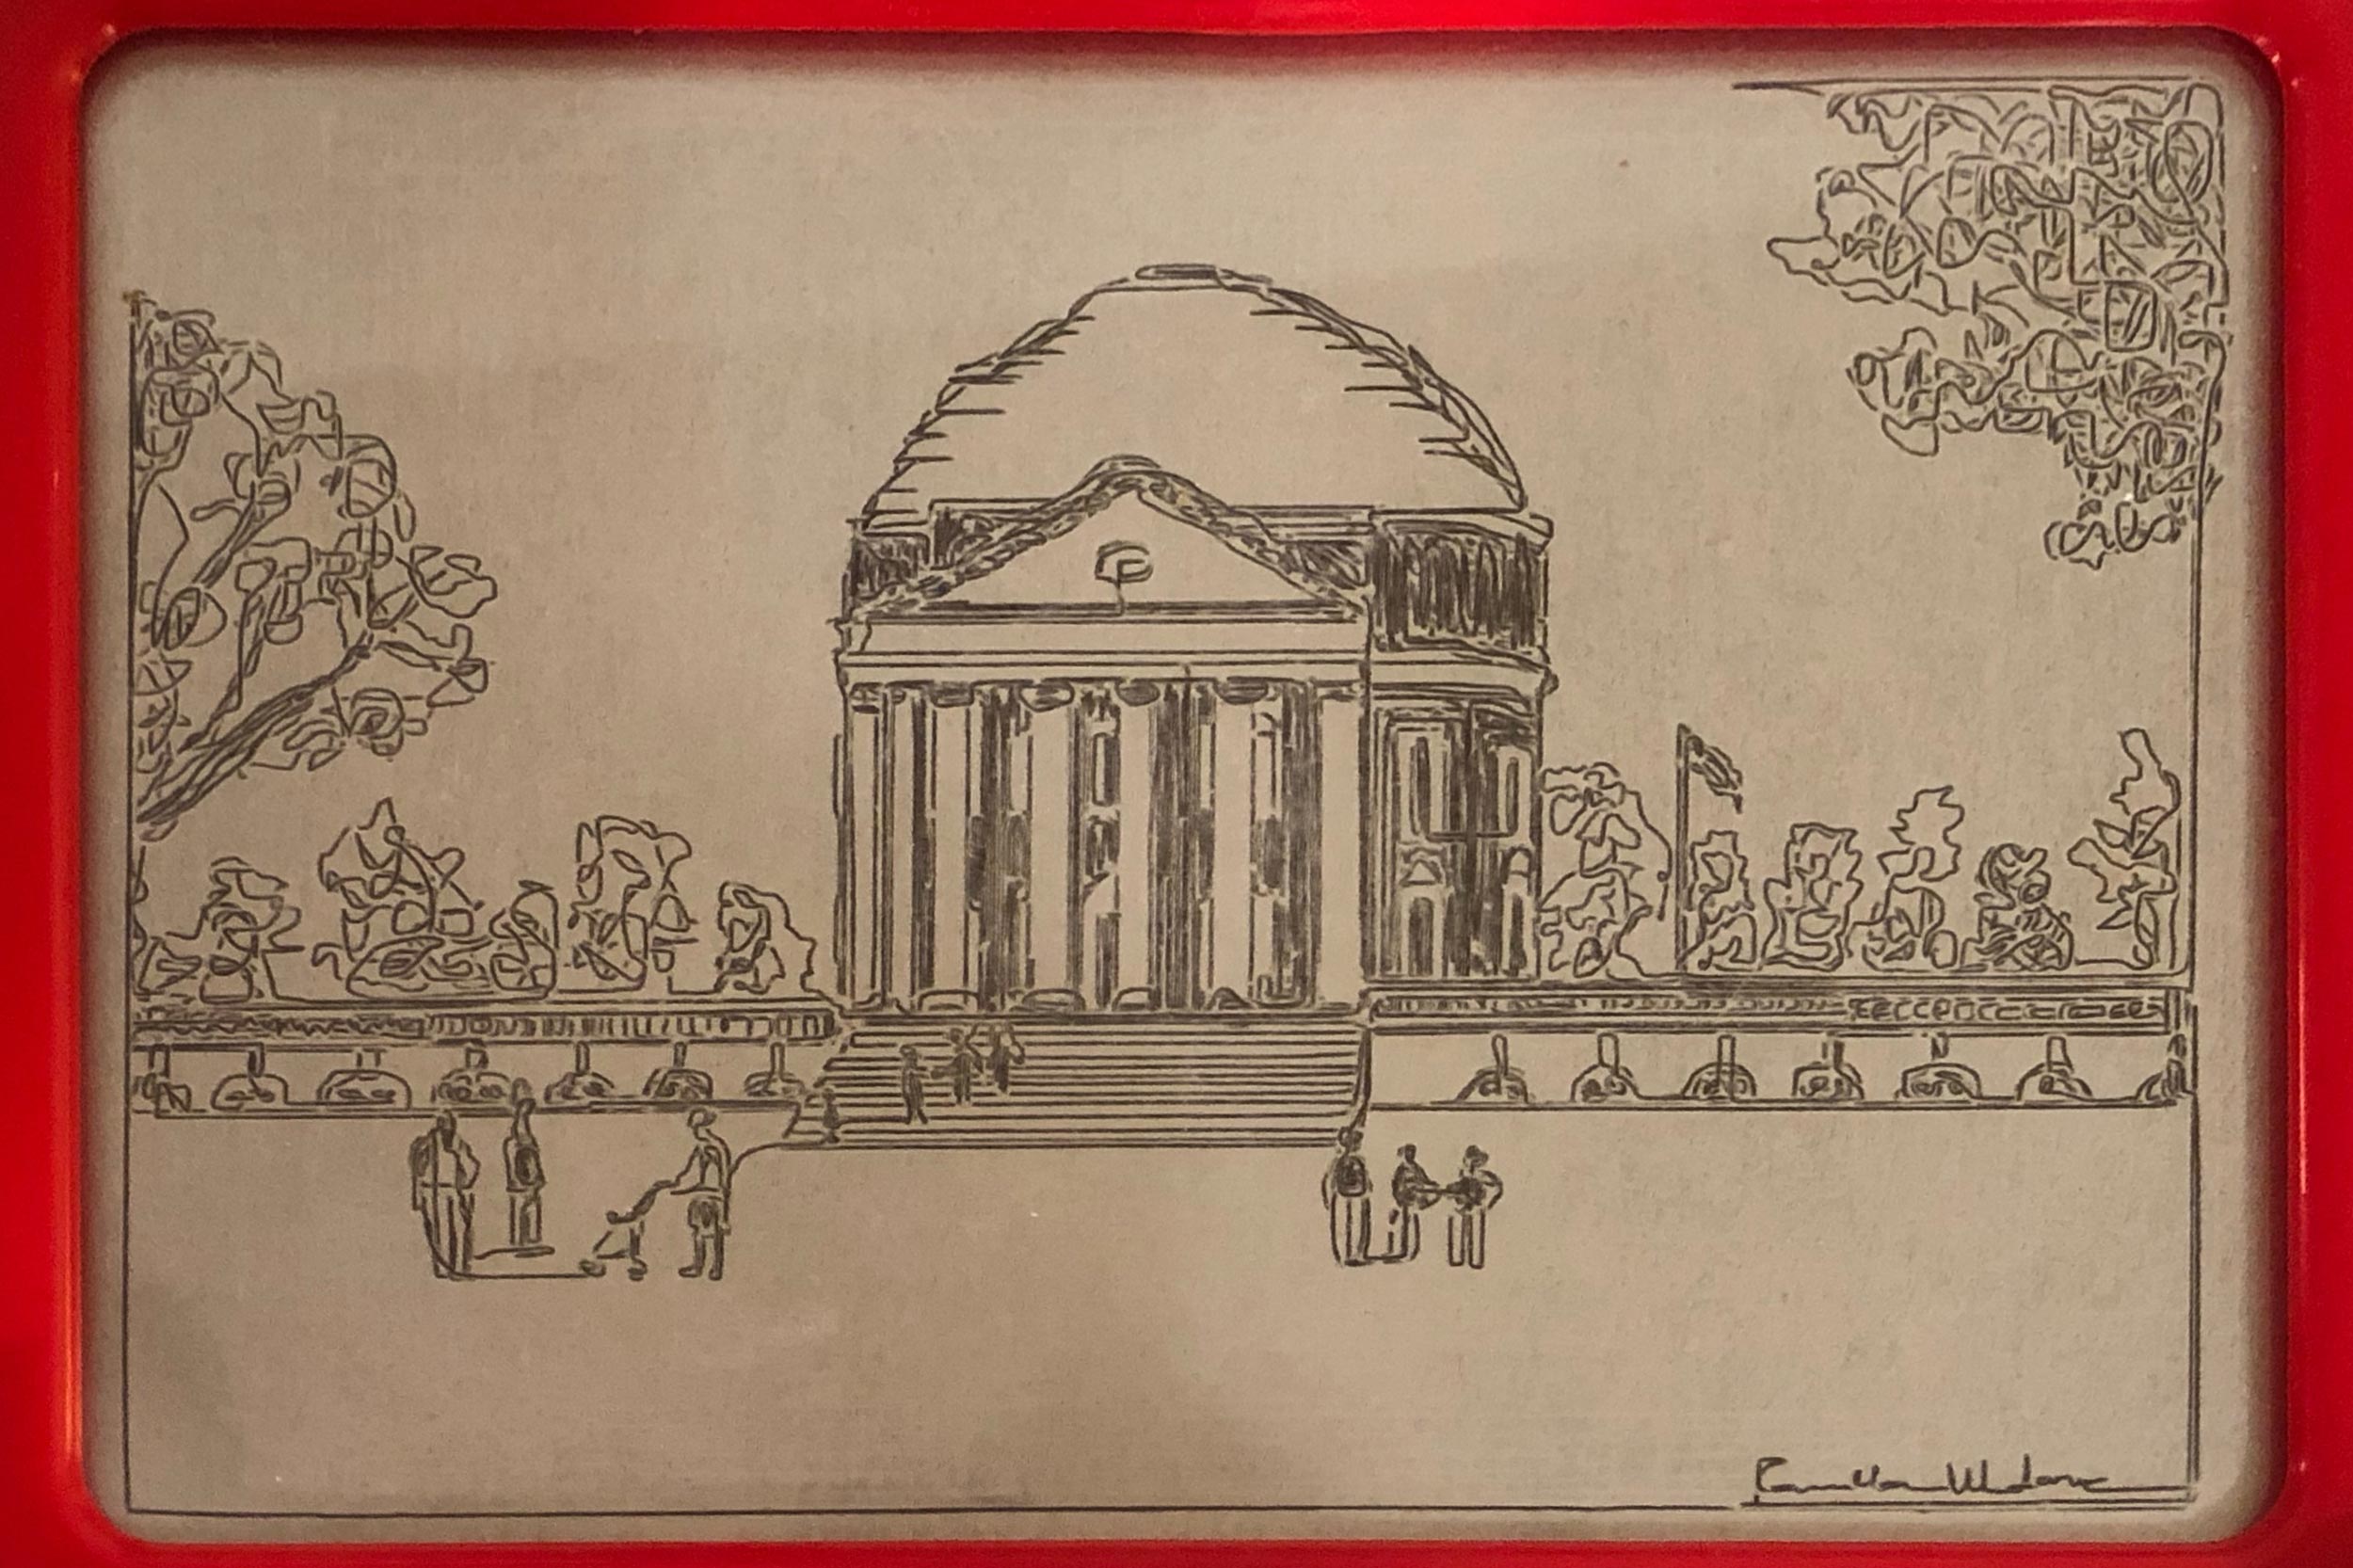 Drawing on an etch a sketch of the Rotunda 